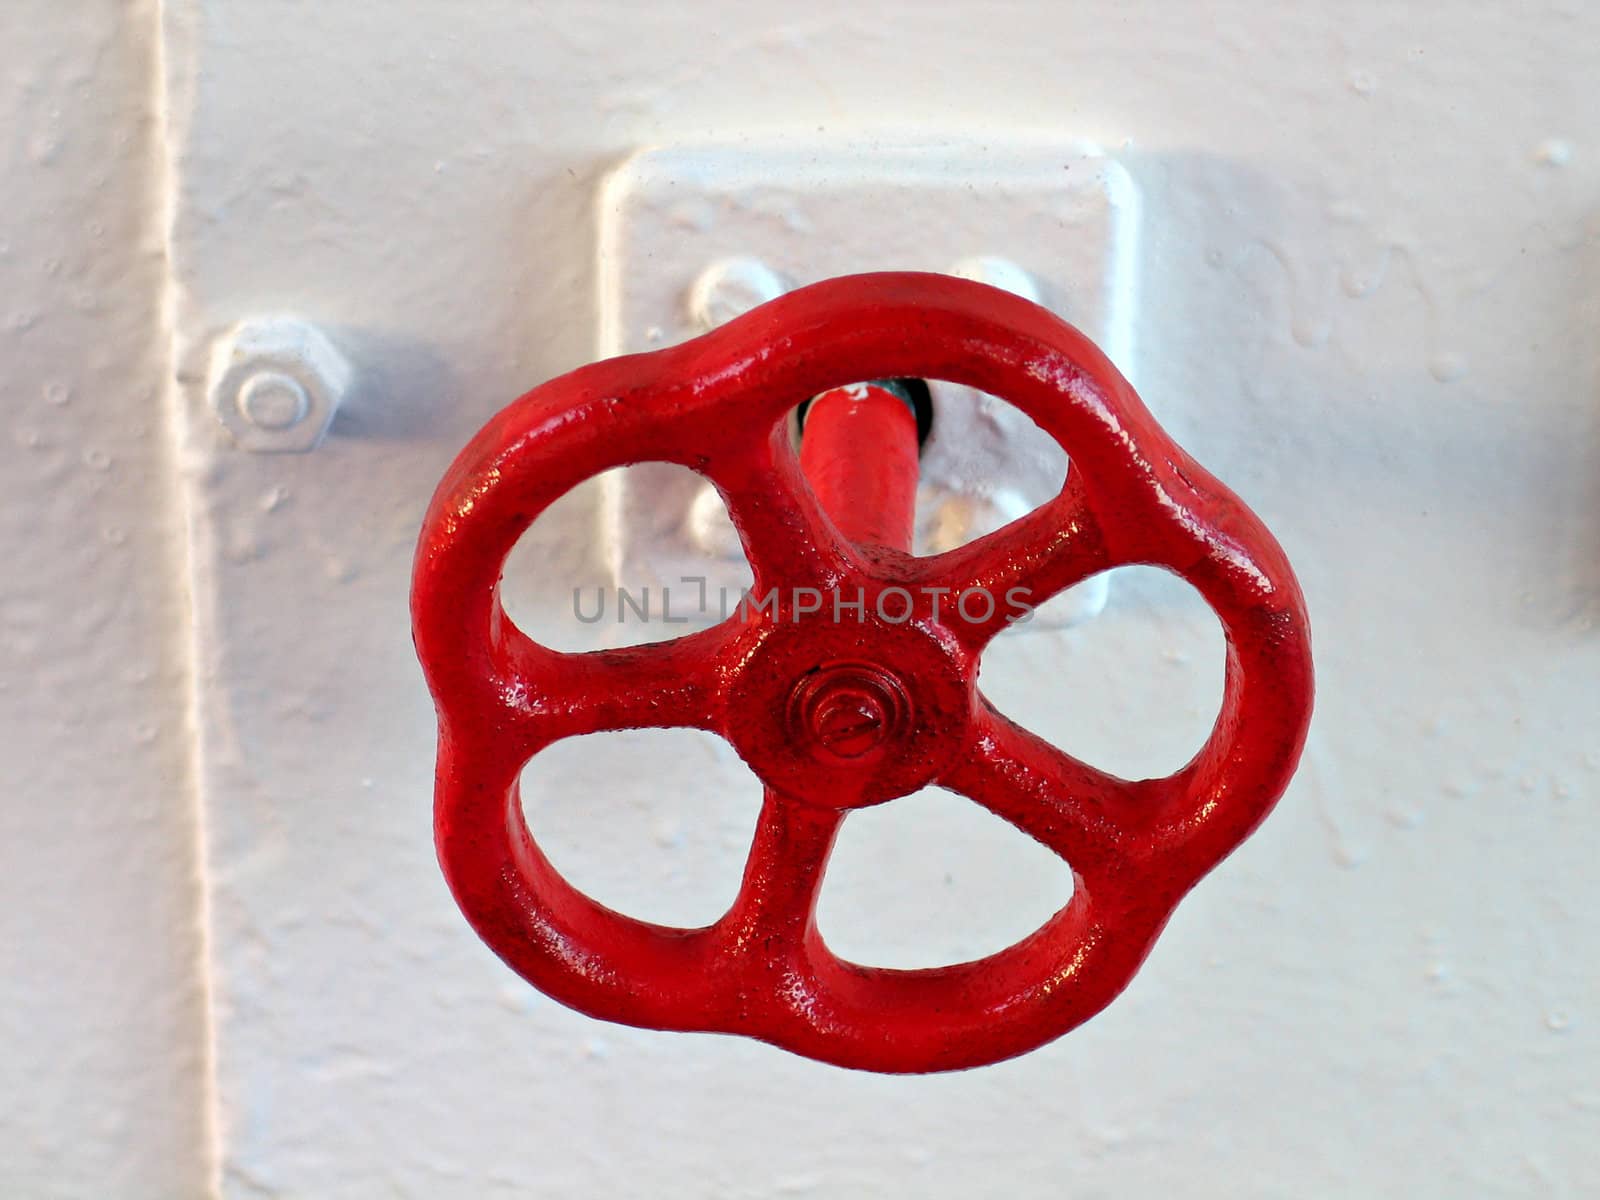 Red emergency industrial tap on a ship in closeup view